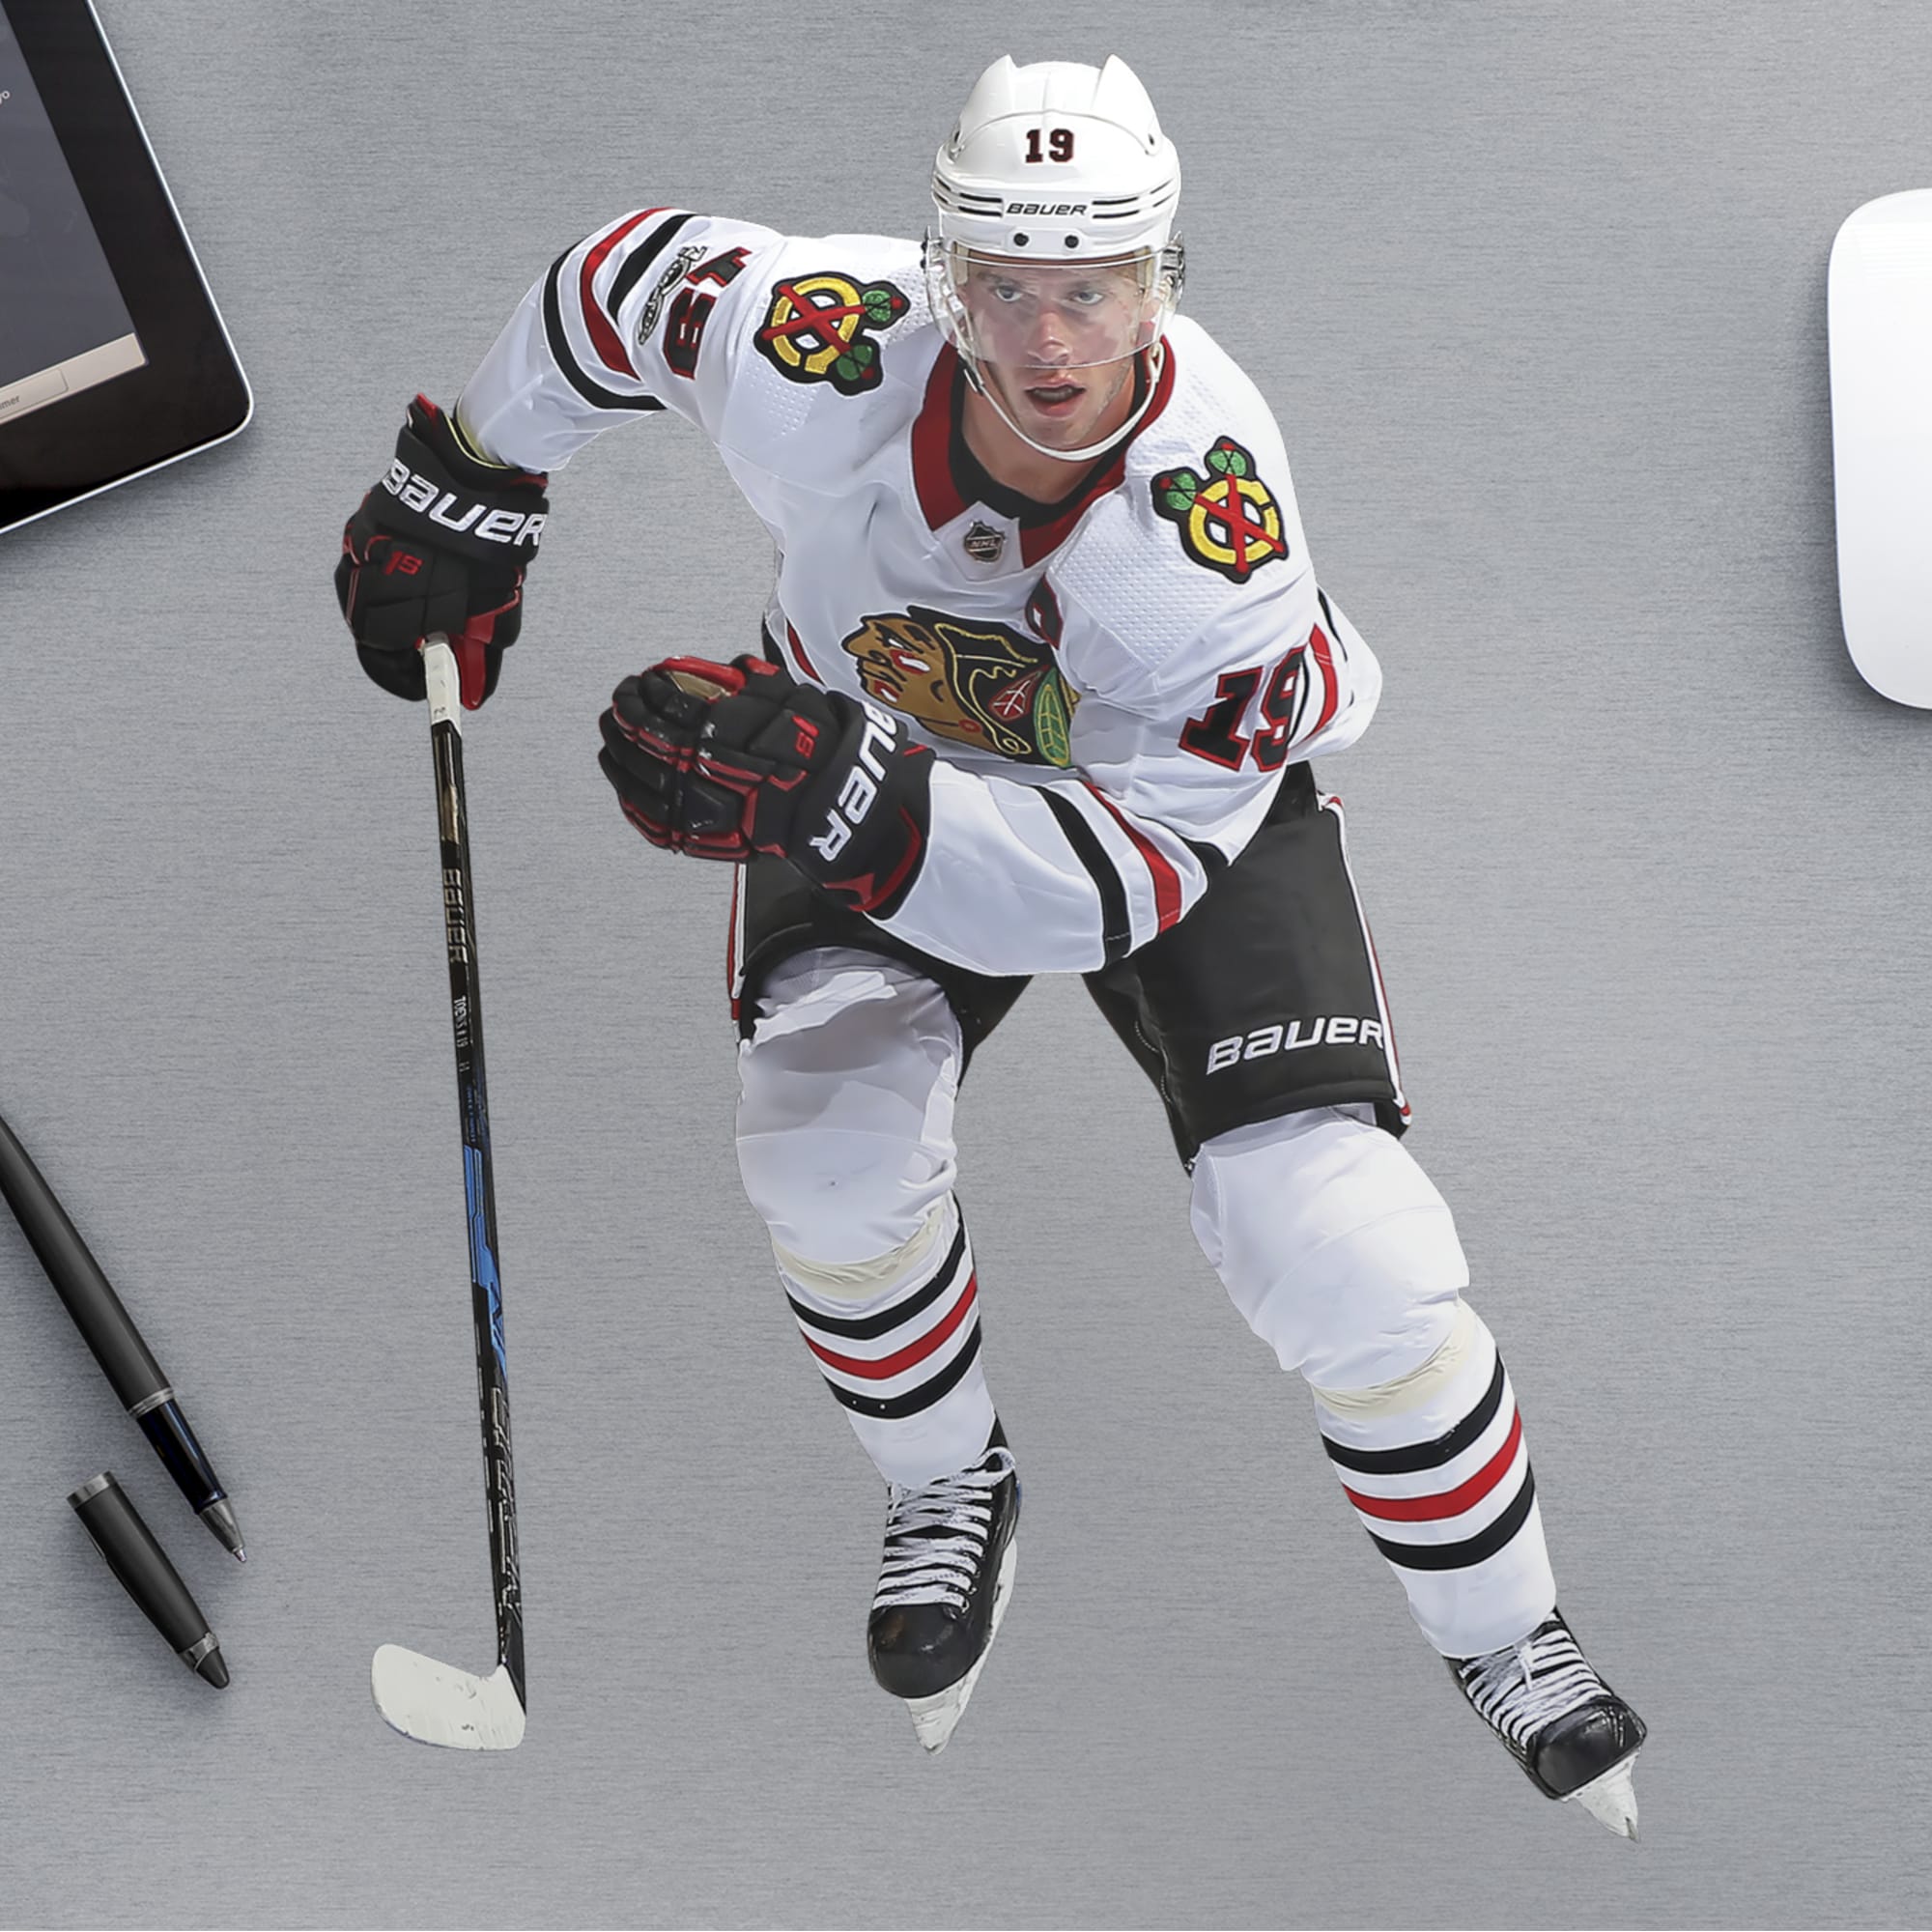 Jonathan Toews for Chicago Blackhawks - Officially Licensed NHL Removable Wall Decal 12.0"W x 17.0"H by Fathead | Vinyl